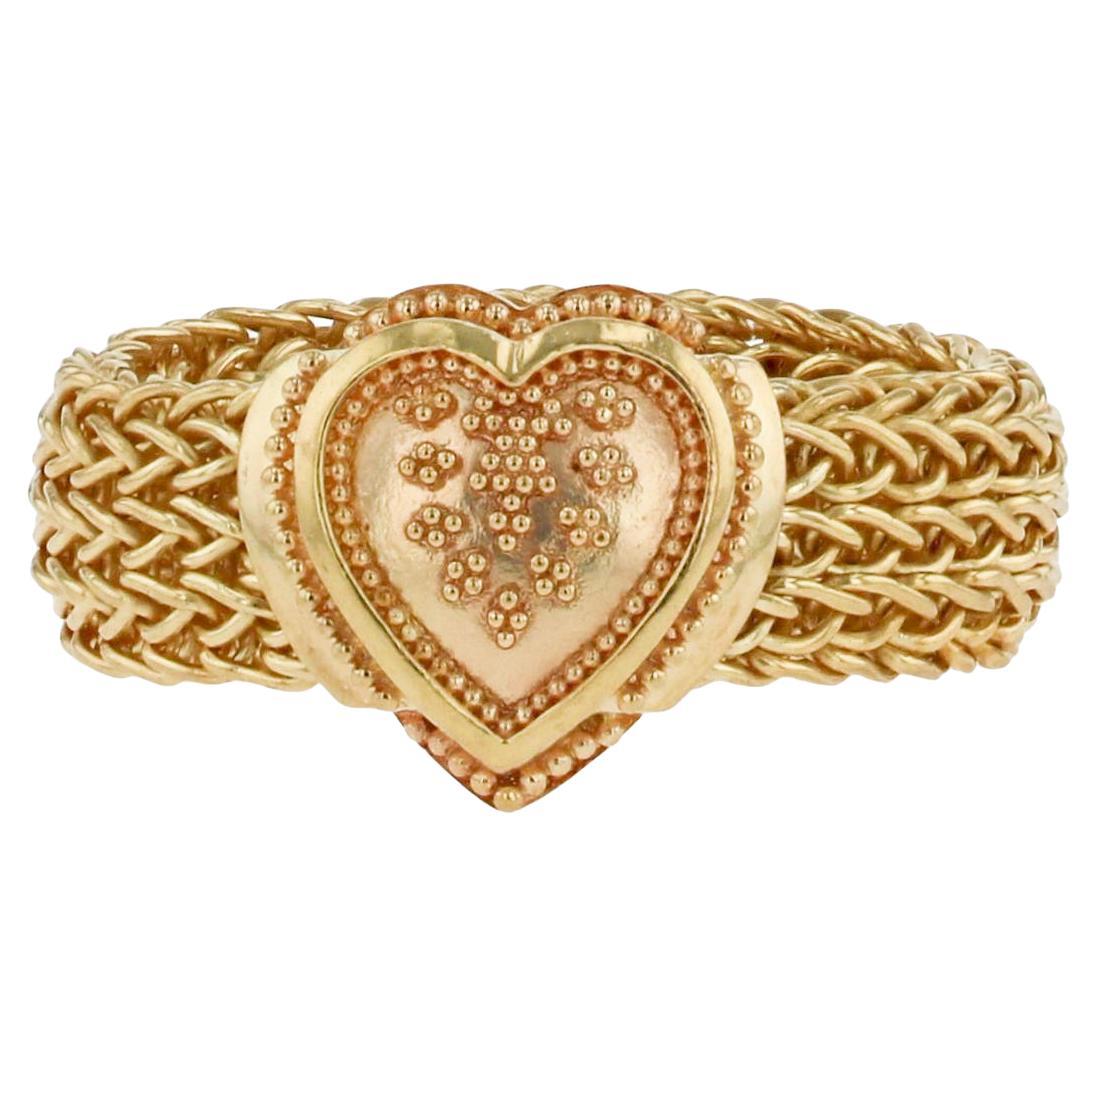 Kent Raible 18 Karat All Gold Heart Ring with a Woven Chain Band and Granulation For Sale